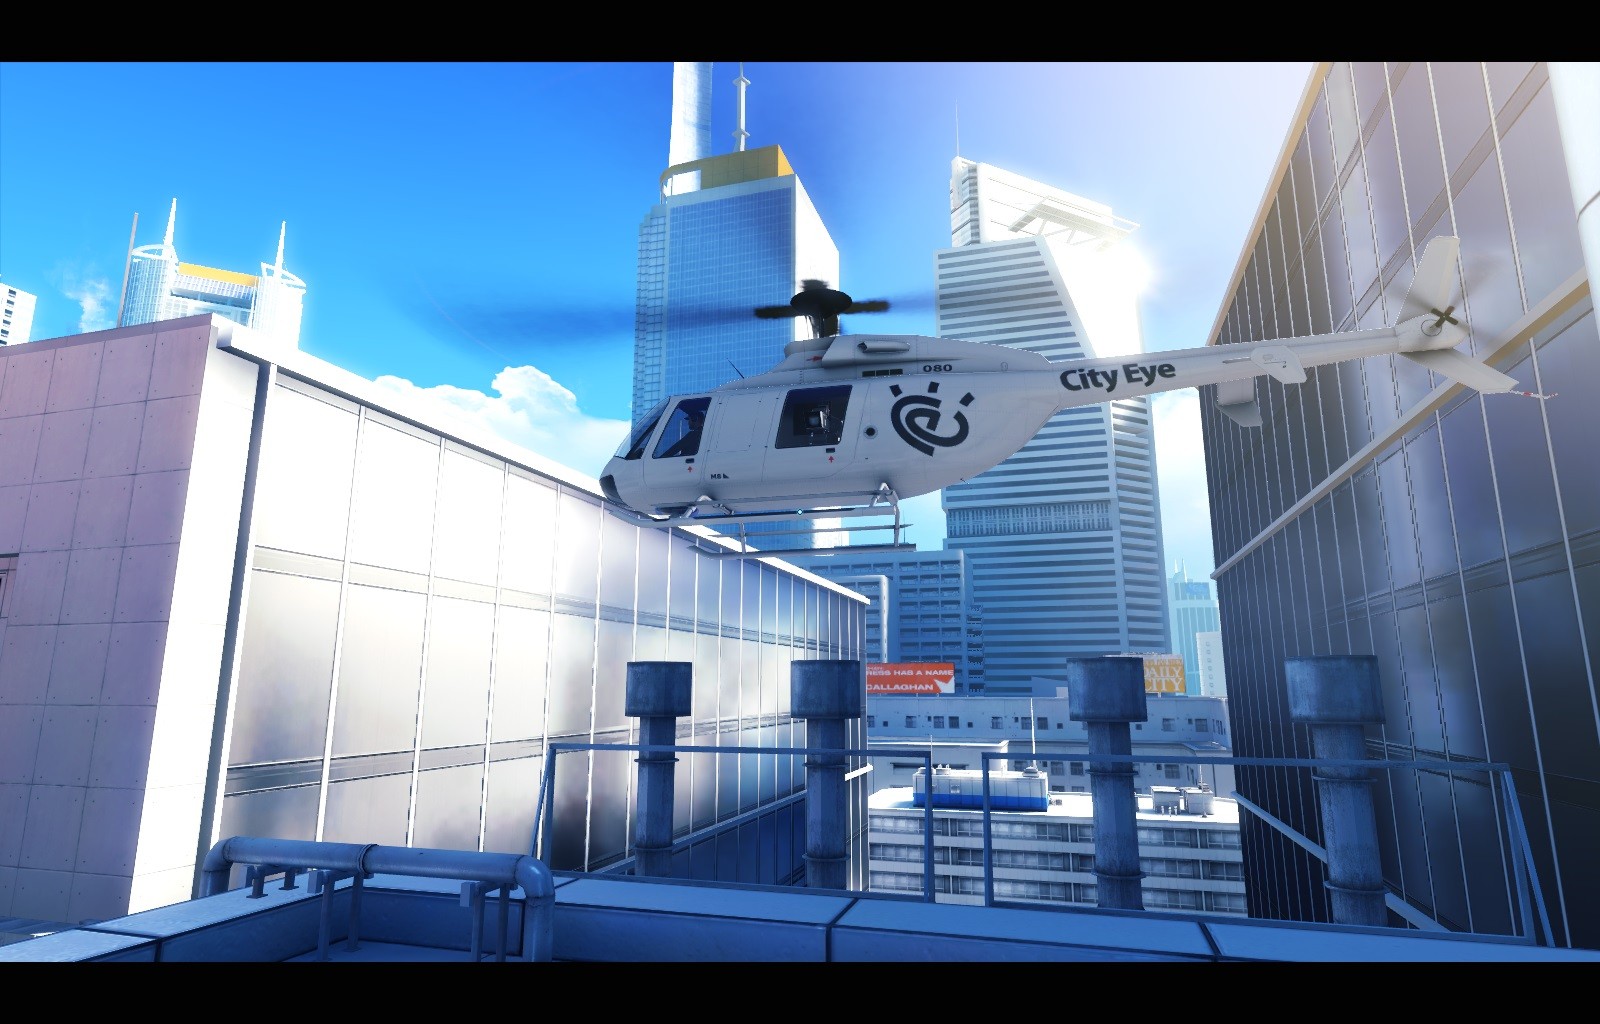 General 1600x1024 aircraft sky skyscraper Mirror's Edge helicopters video games PC gaming vehicle